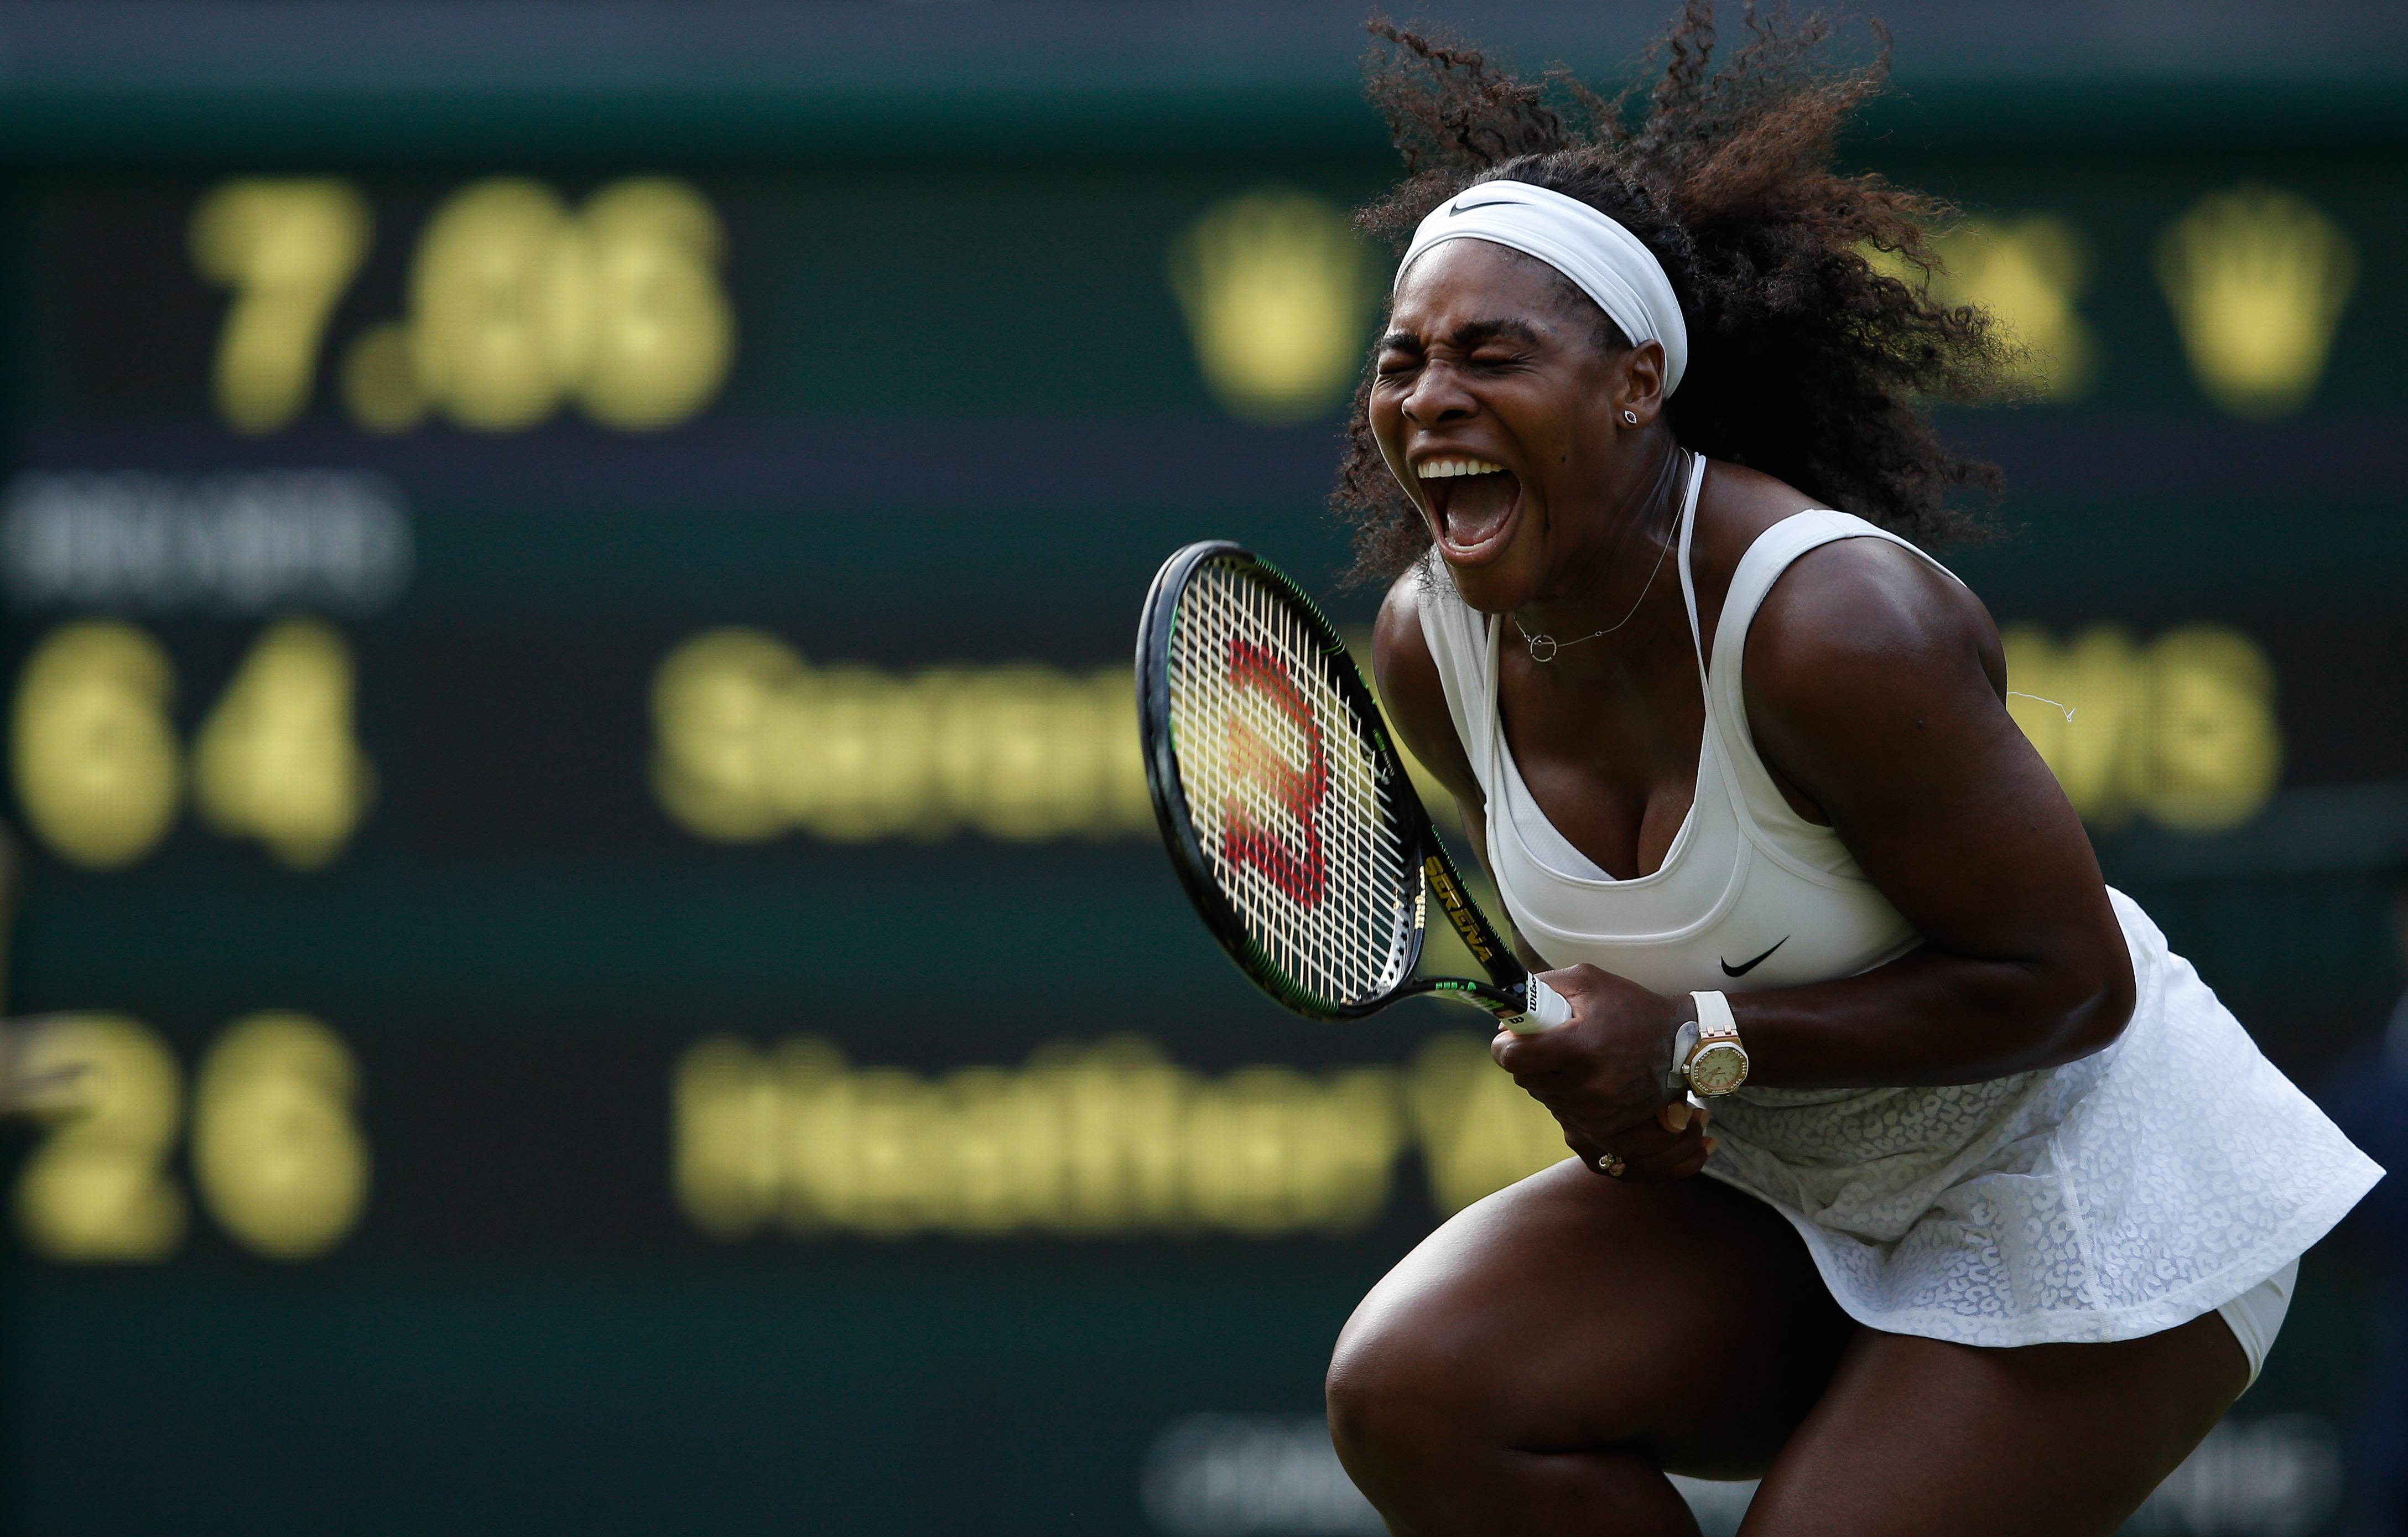 Serena Williams screams in delight after winning a point against Britain's Heather Watson during their third-round match at Wimbledon. Photo: AFP